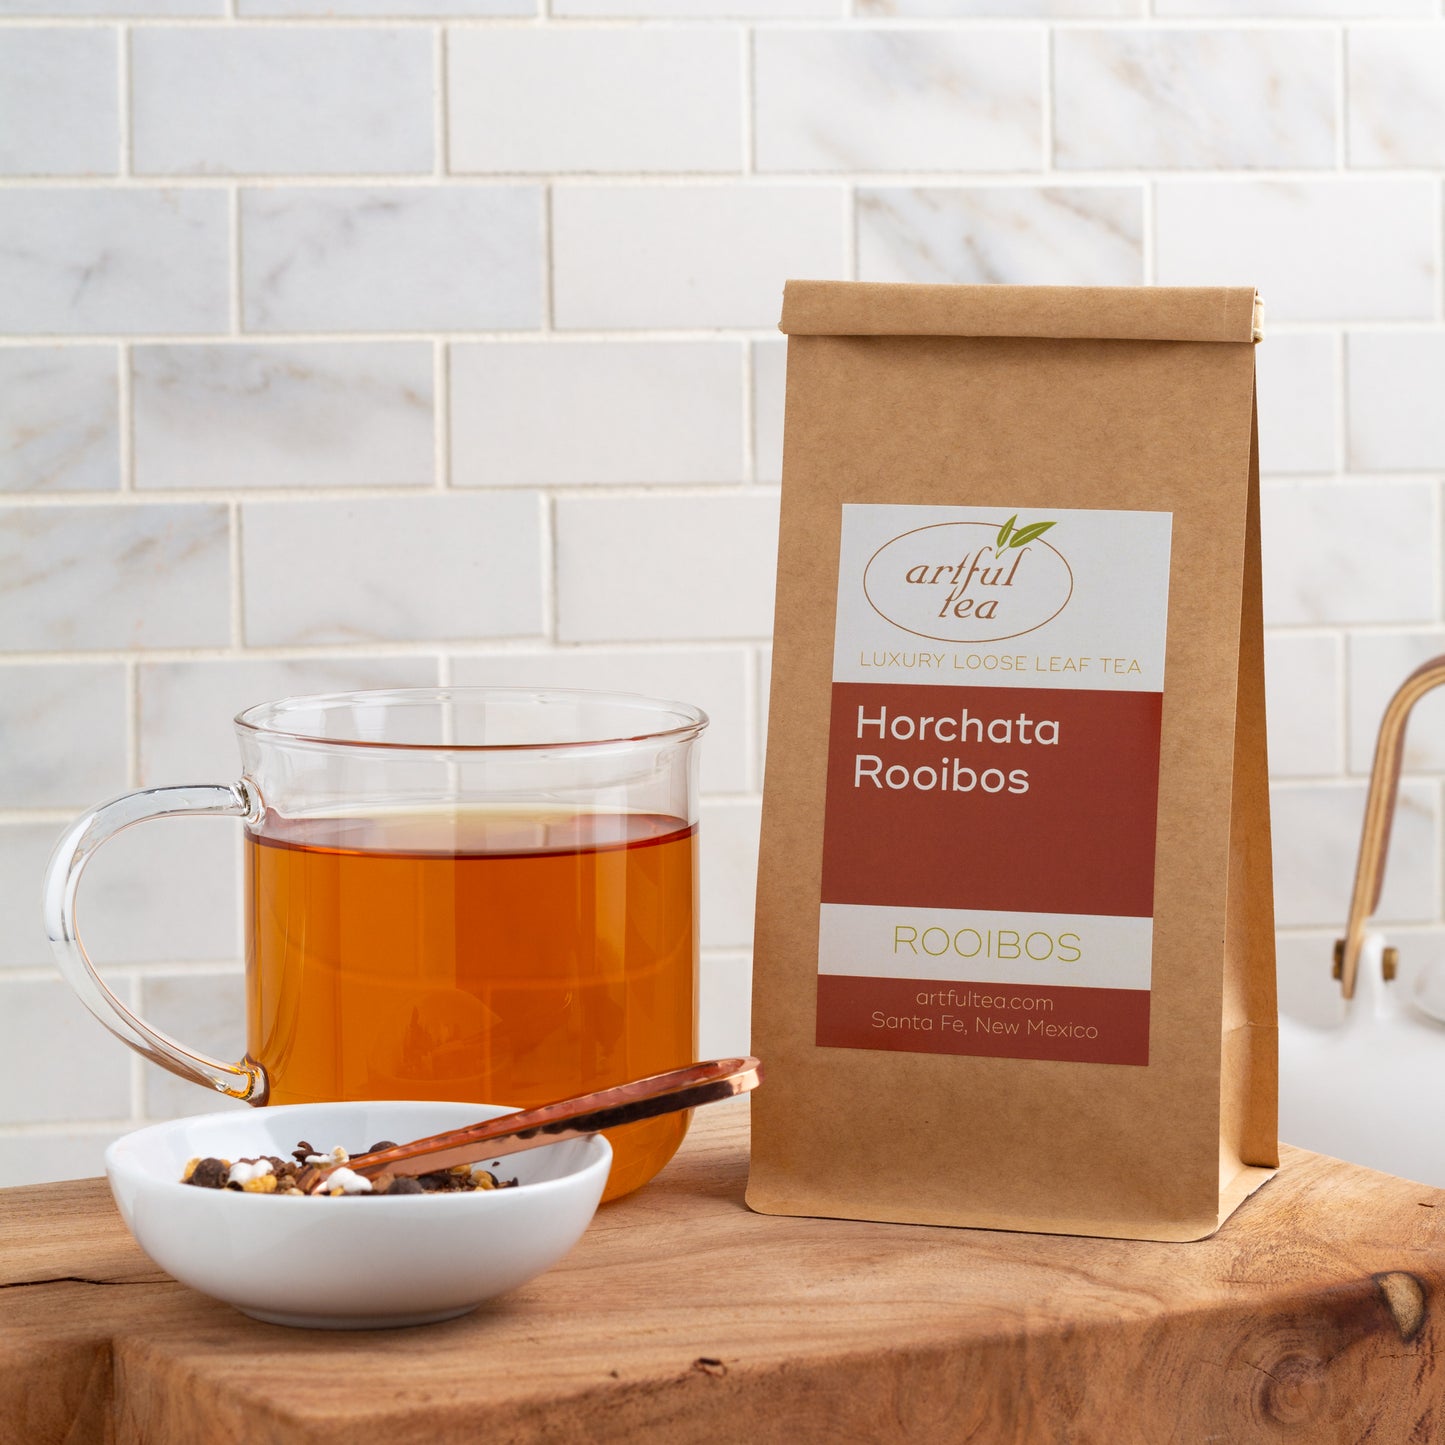 Horchata Rooibos Herbal Tea shown packaged in a kraft bag, displayed on a wooden board with a glass mug of brewed tea and a small white dish of ingredients on the left